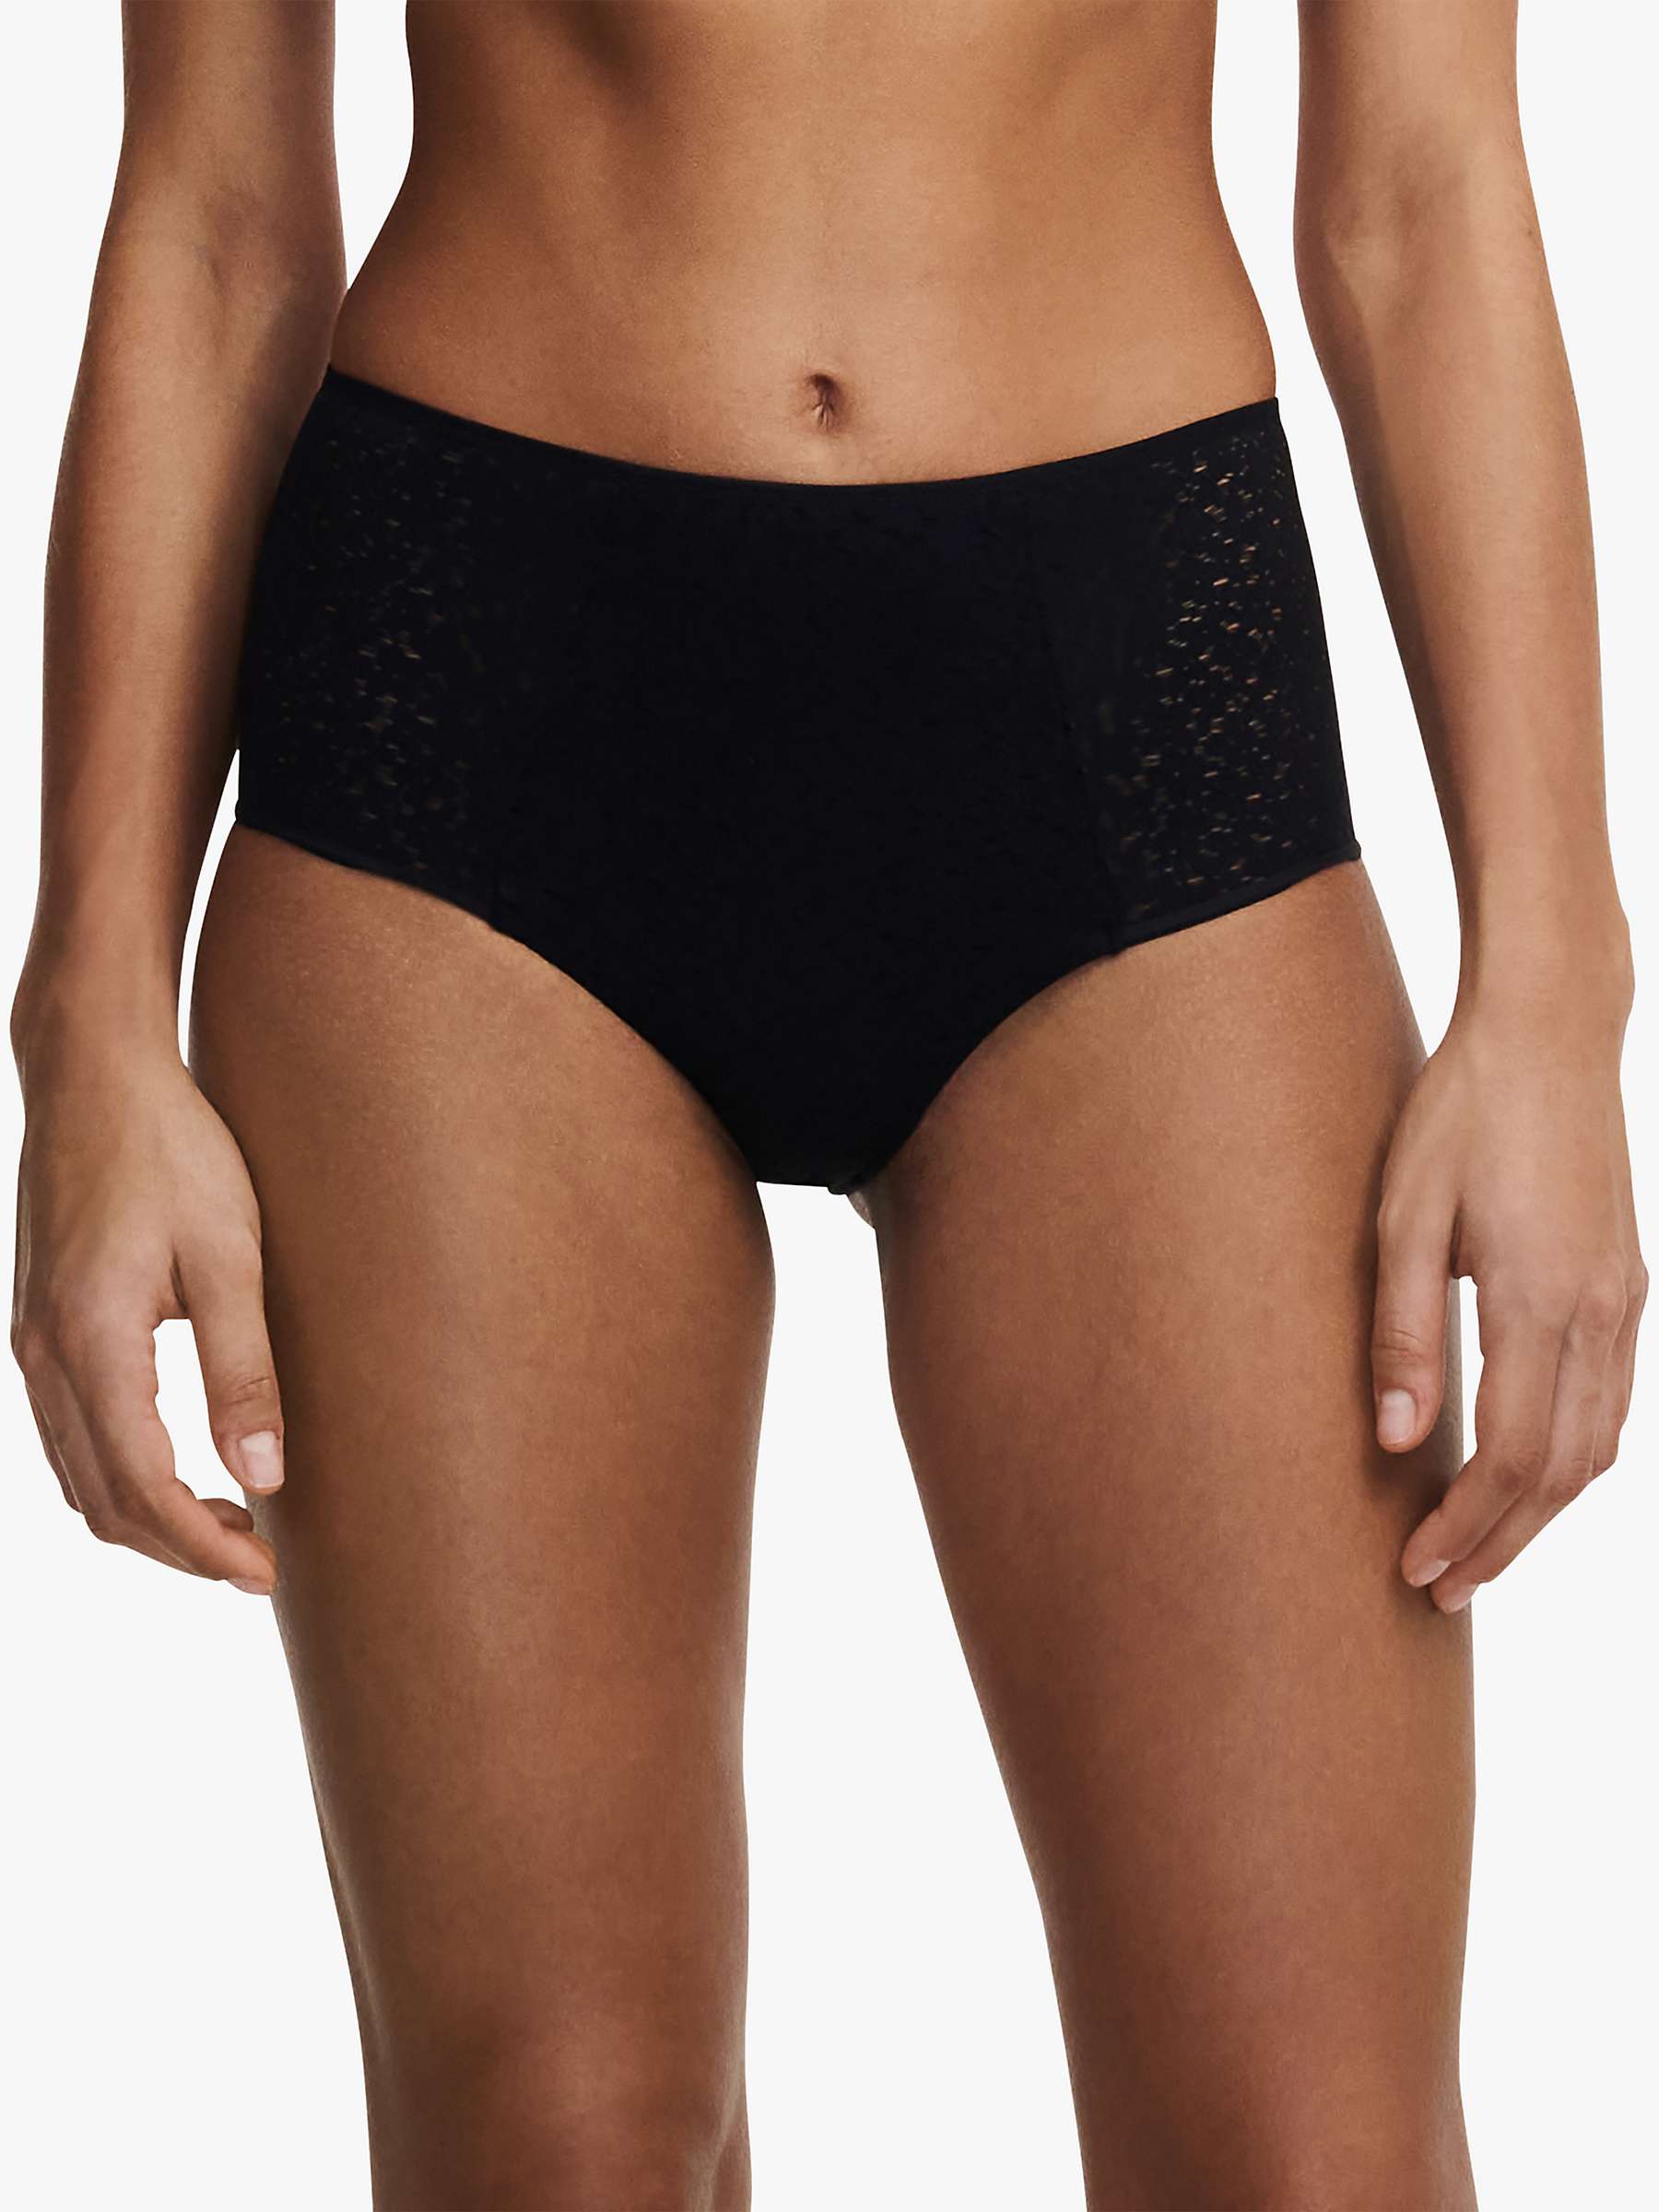 Buy Chantelle Norah Comfort High Waisted Knickers Online at johnlewis.com